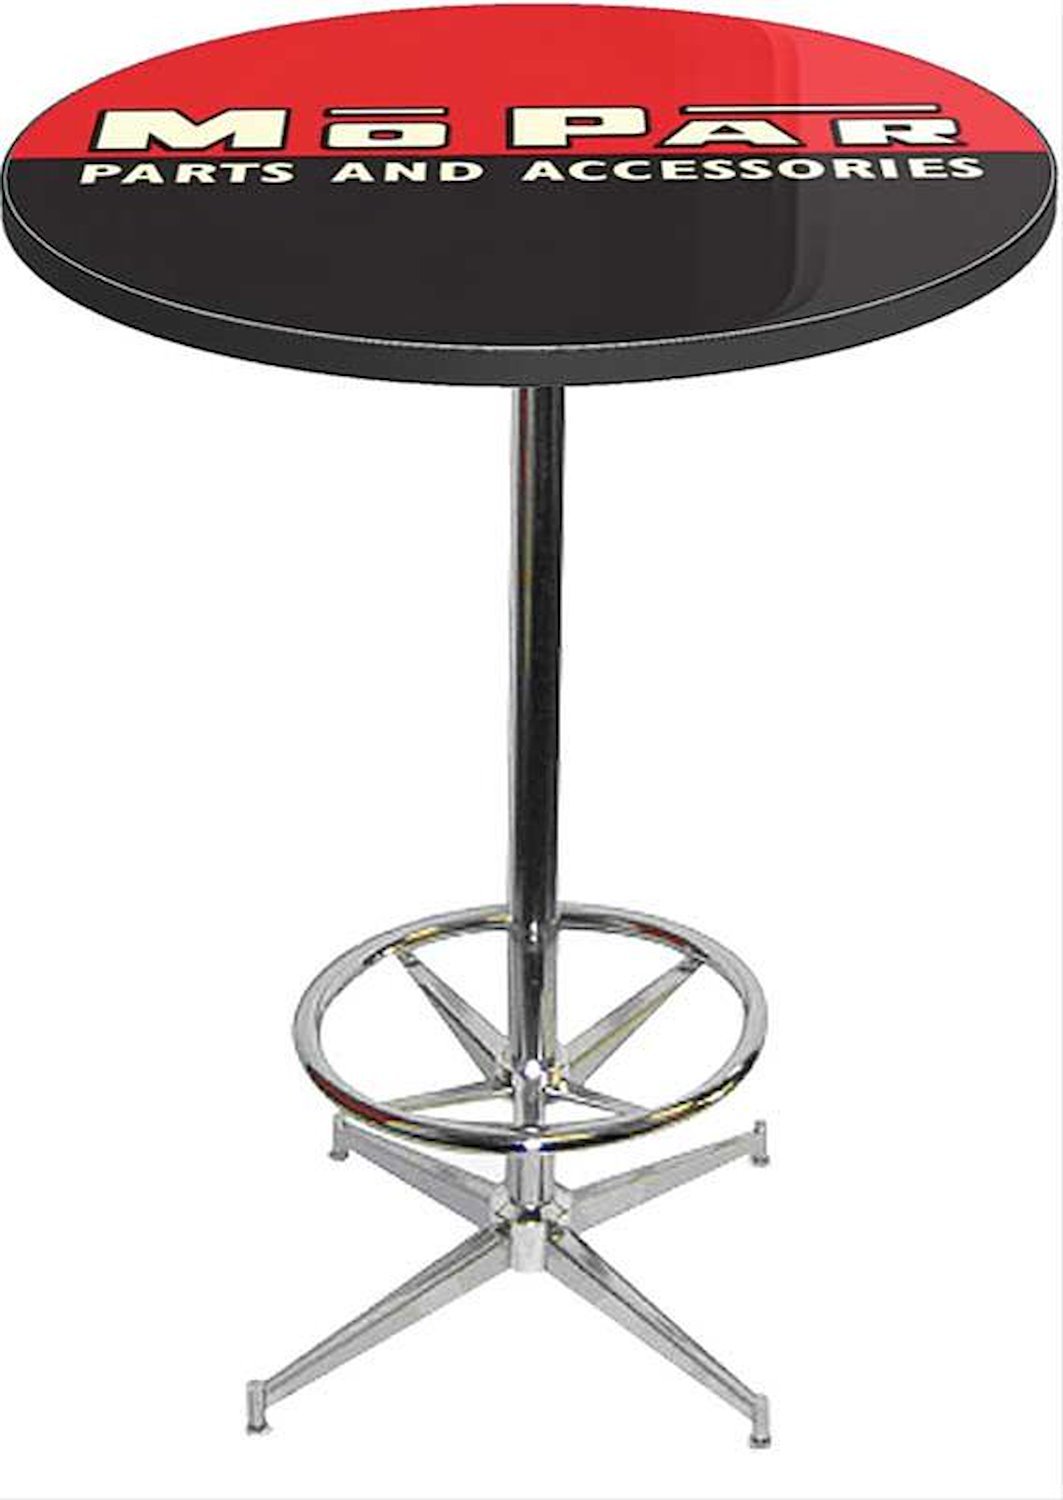 MD673103 Pub Table With Chrome Base And Foot Rest 1948-53 Style Black/Red Mopar parts And Accessories Logo Pub Table With Chrome